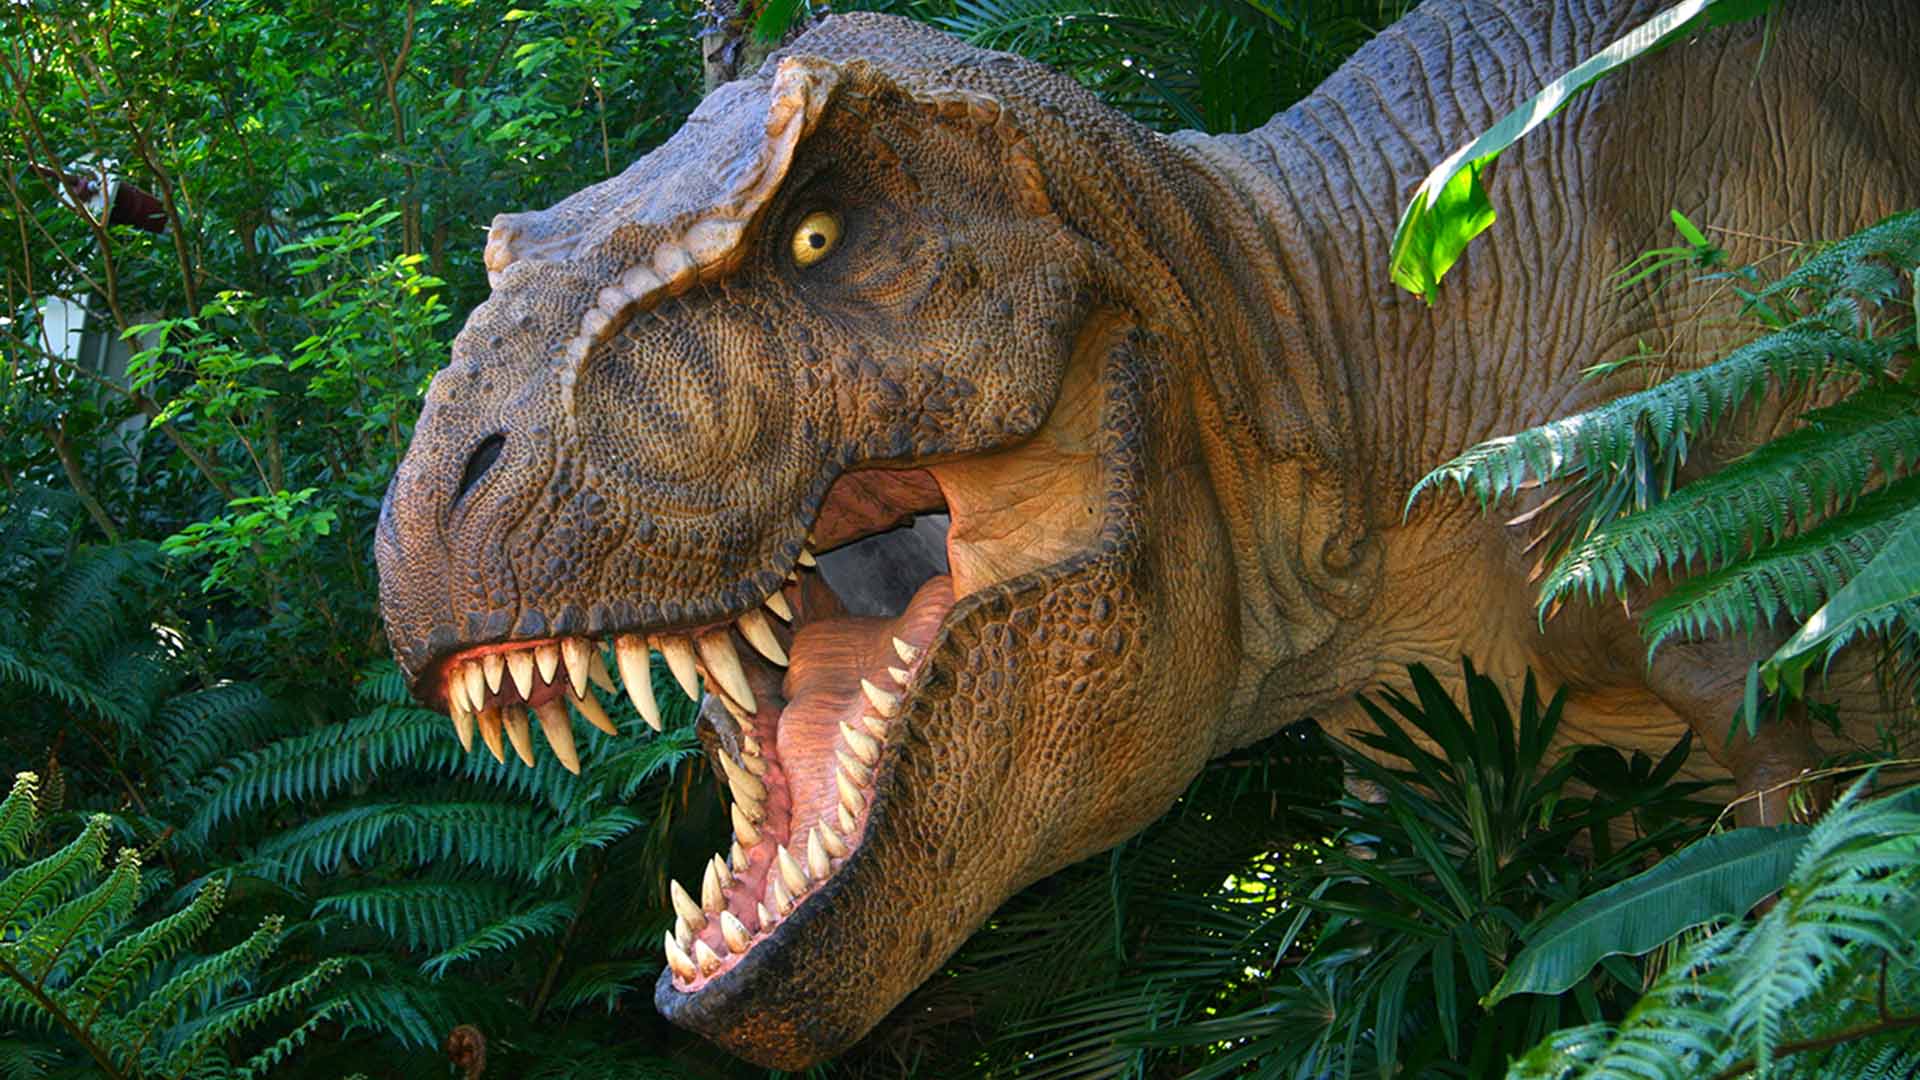 A t-rex with a green luscious plant background behind it